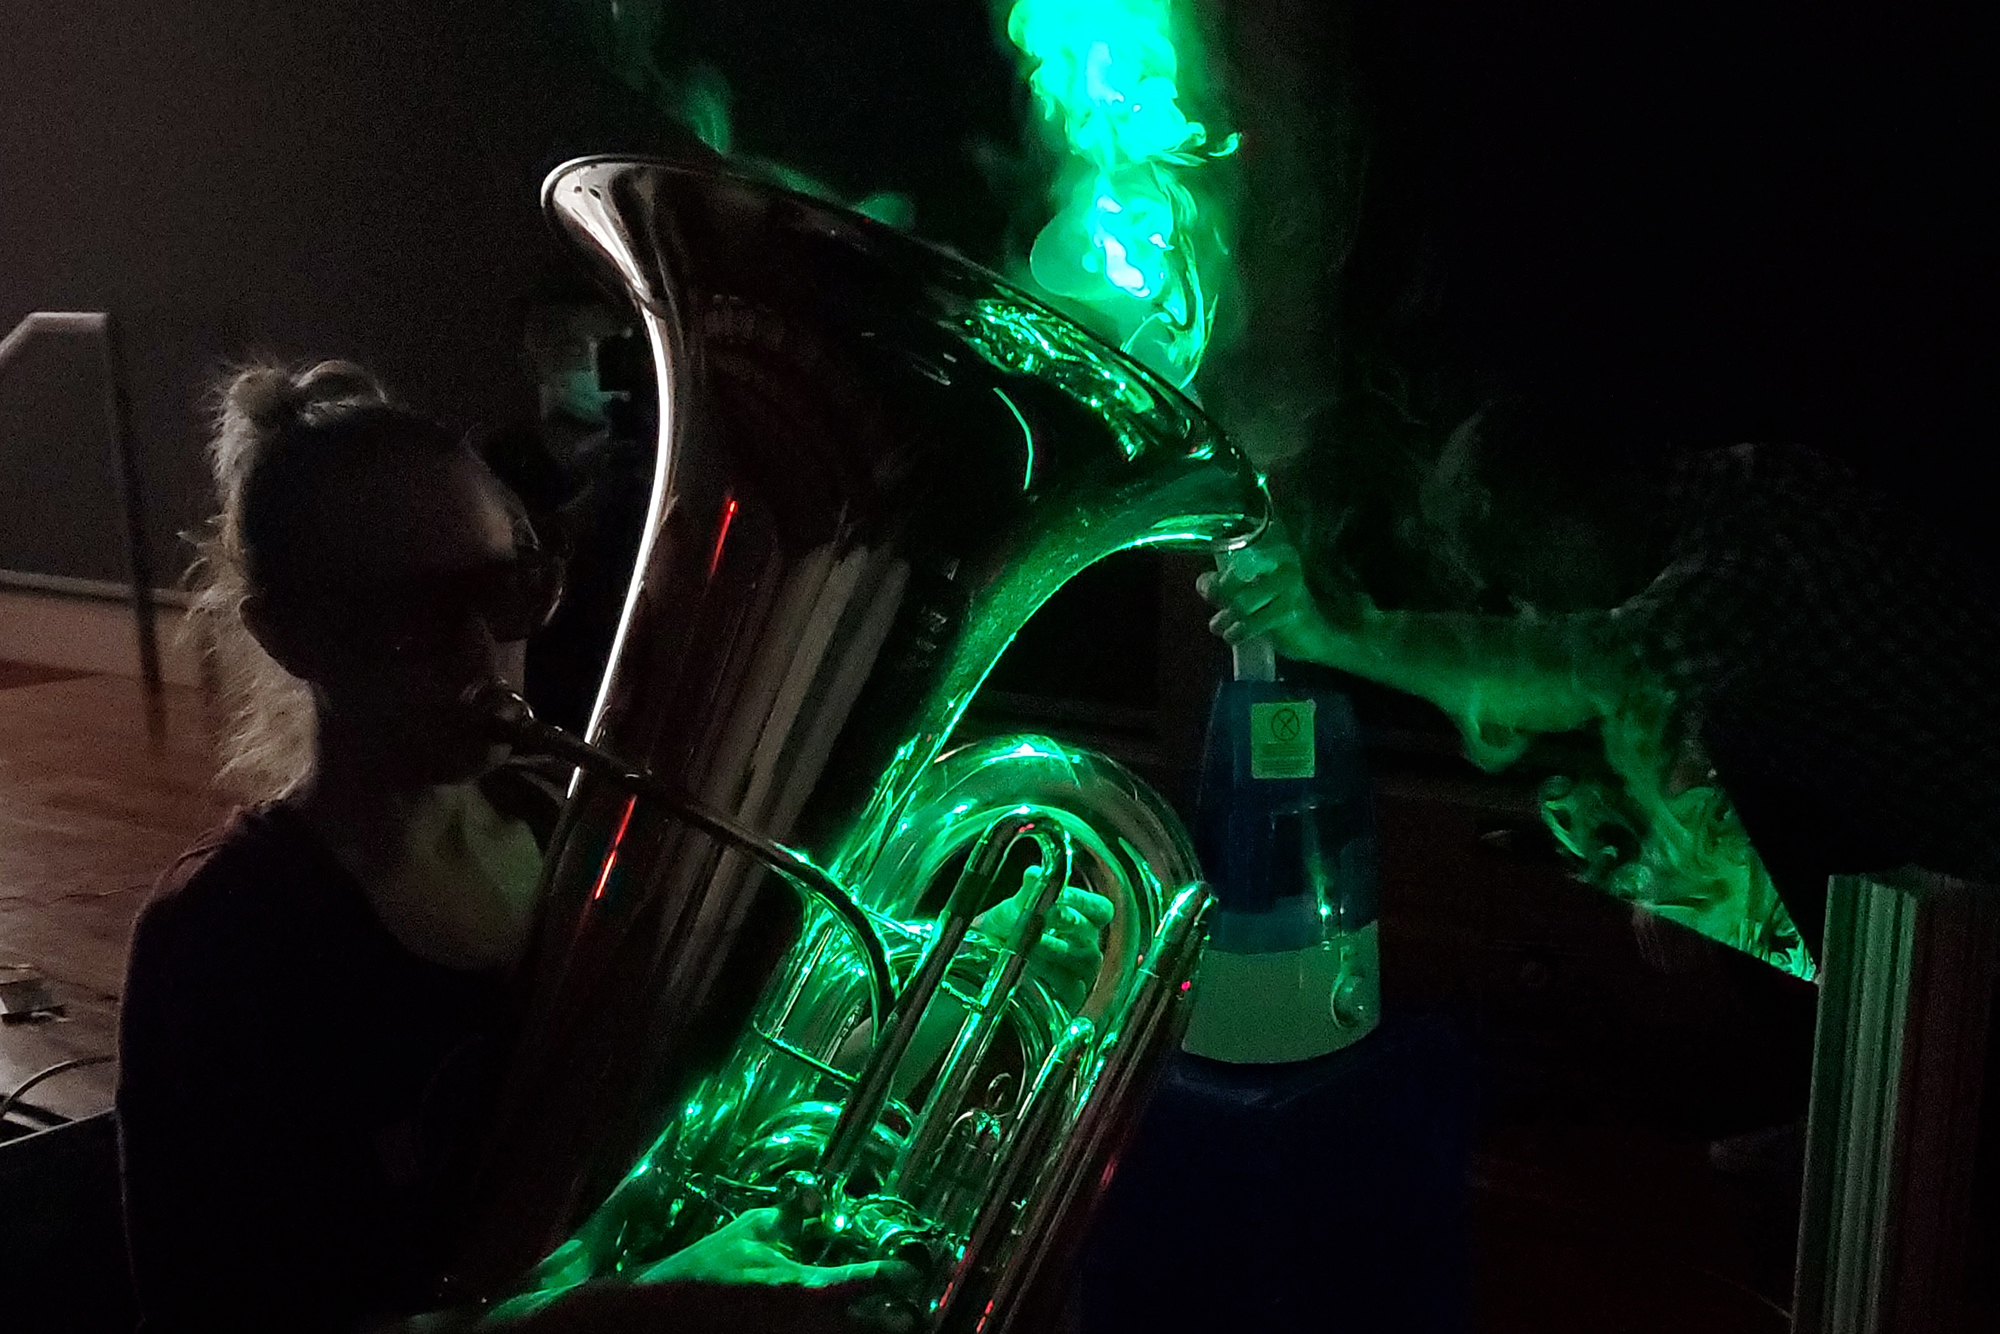 Person playing a tuba in a dark room with a green laser shedding light on water mist